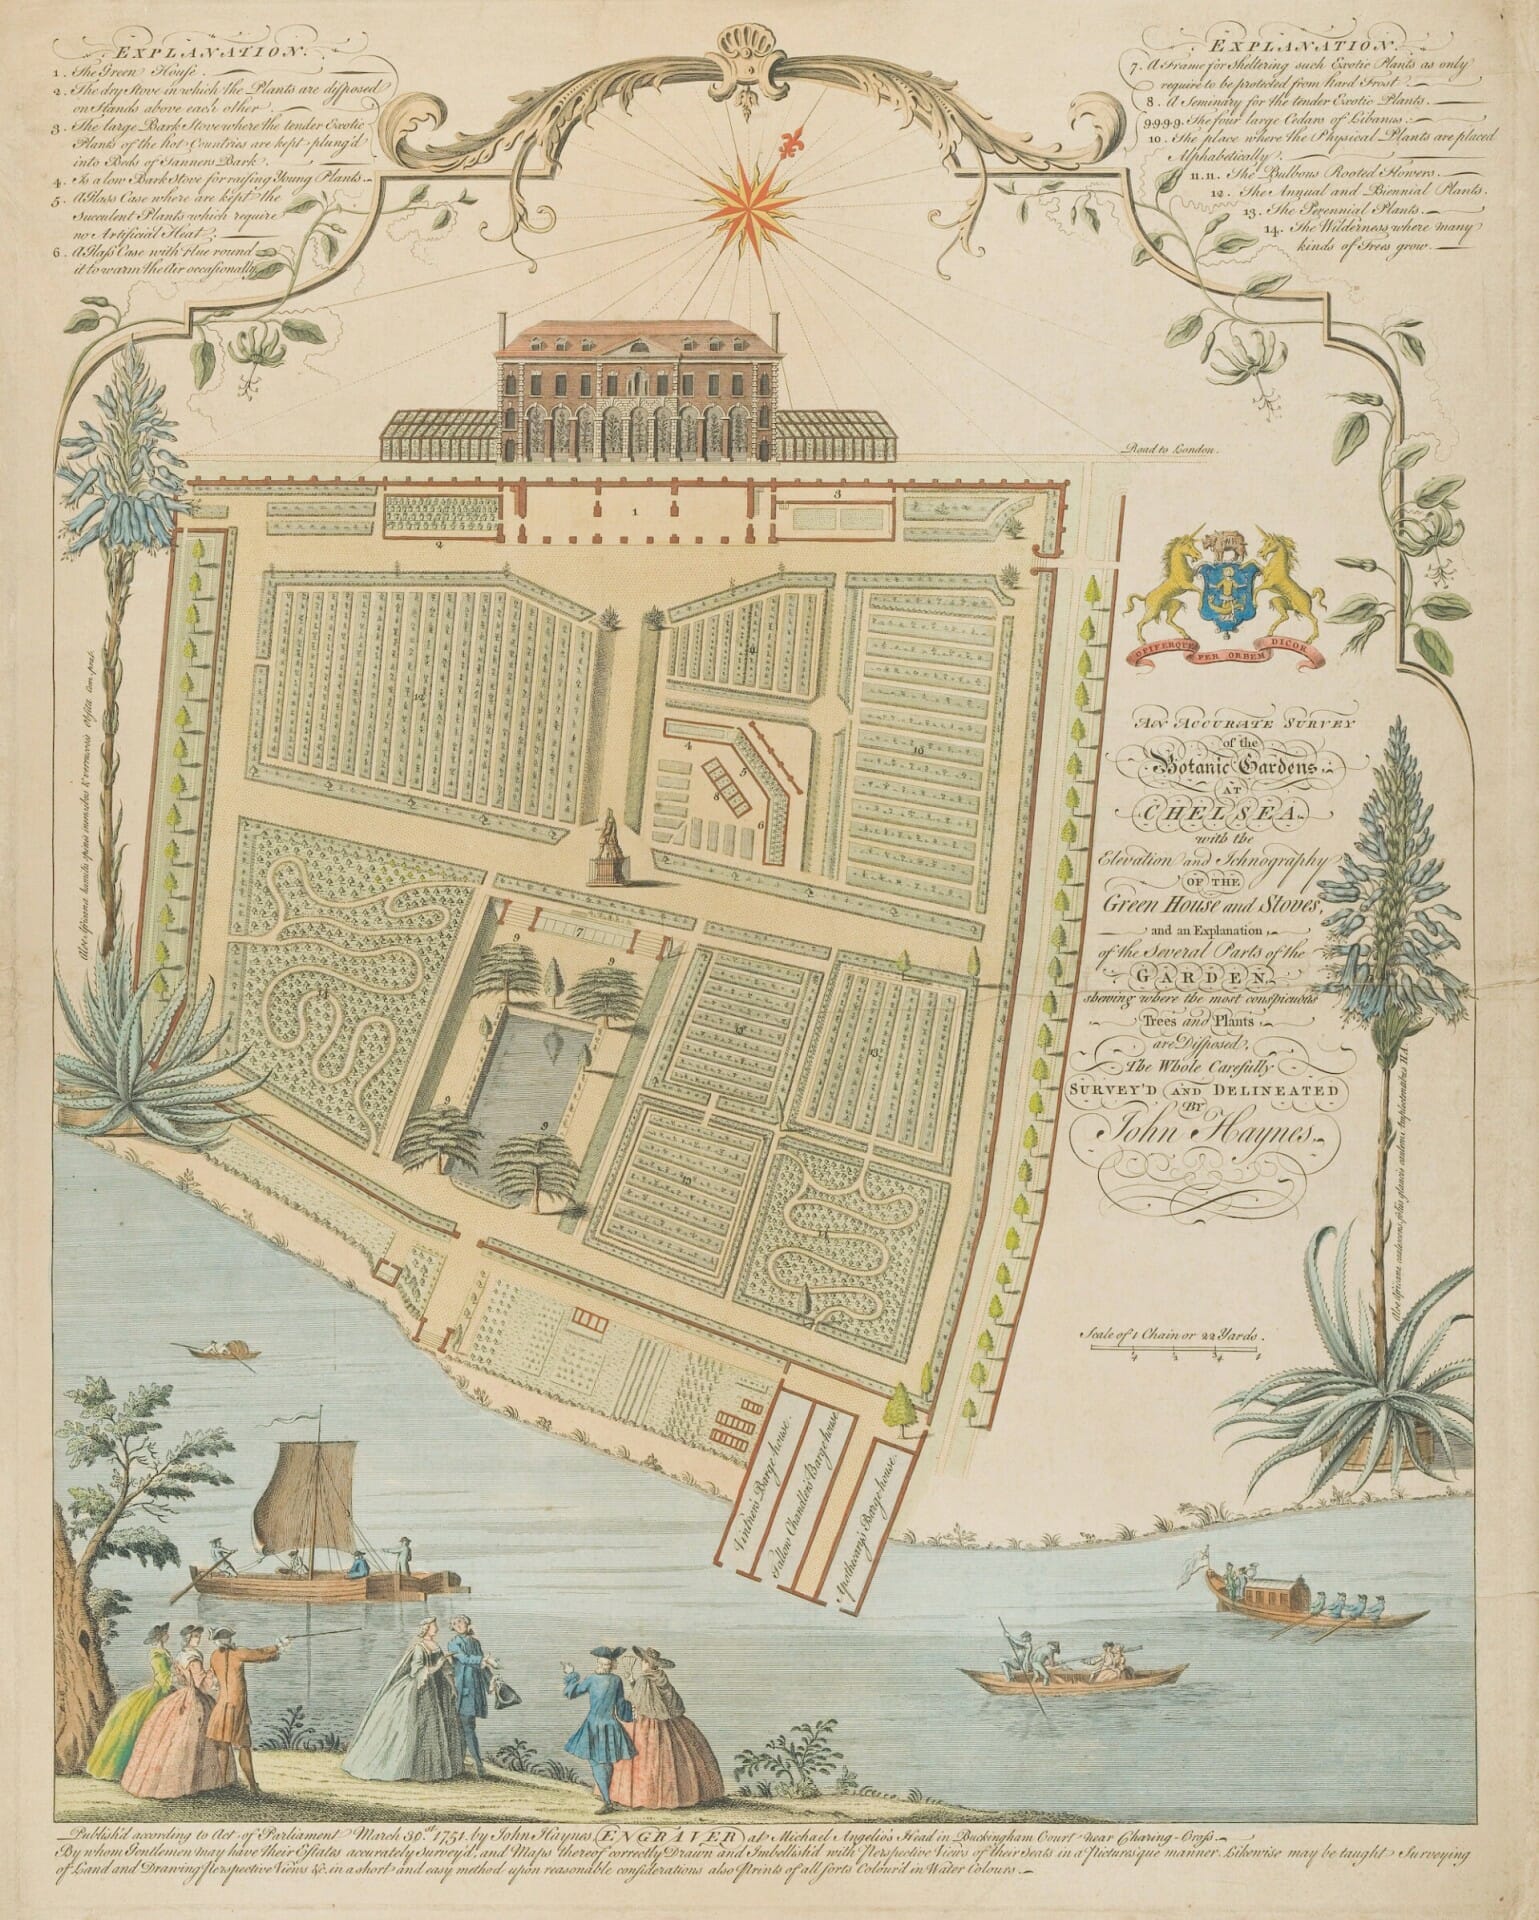 John Haynes, “The Physic Garden, Chelsea: A Plan View” (1751), engraving with watercolor, 24 ¼ × 18 ¾ inches. Image courtesy of the Wellcome Collection, London